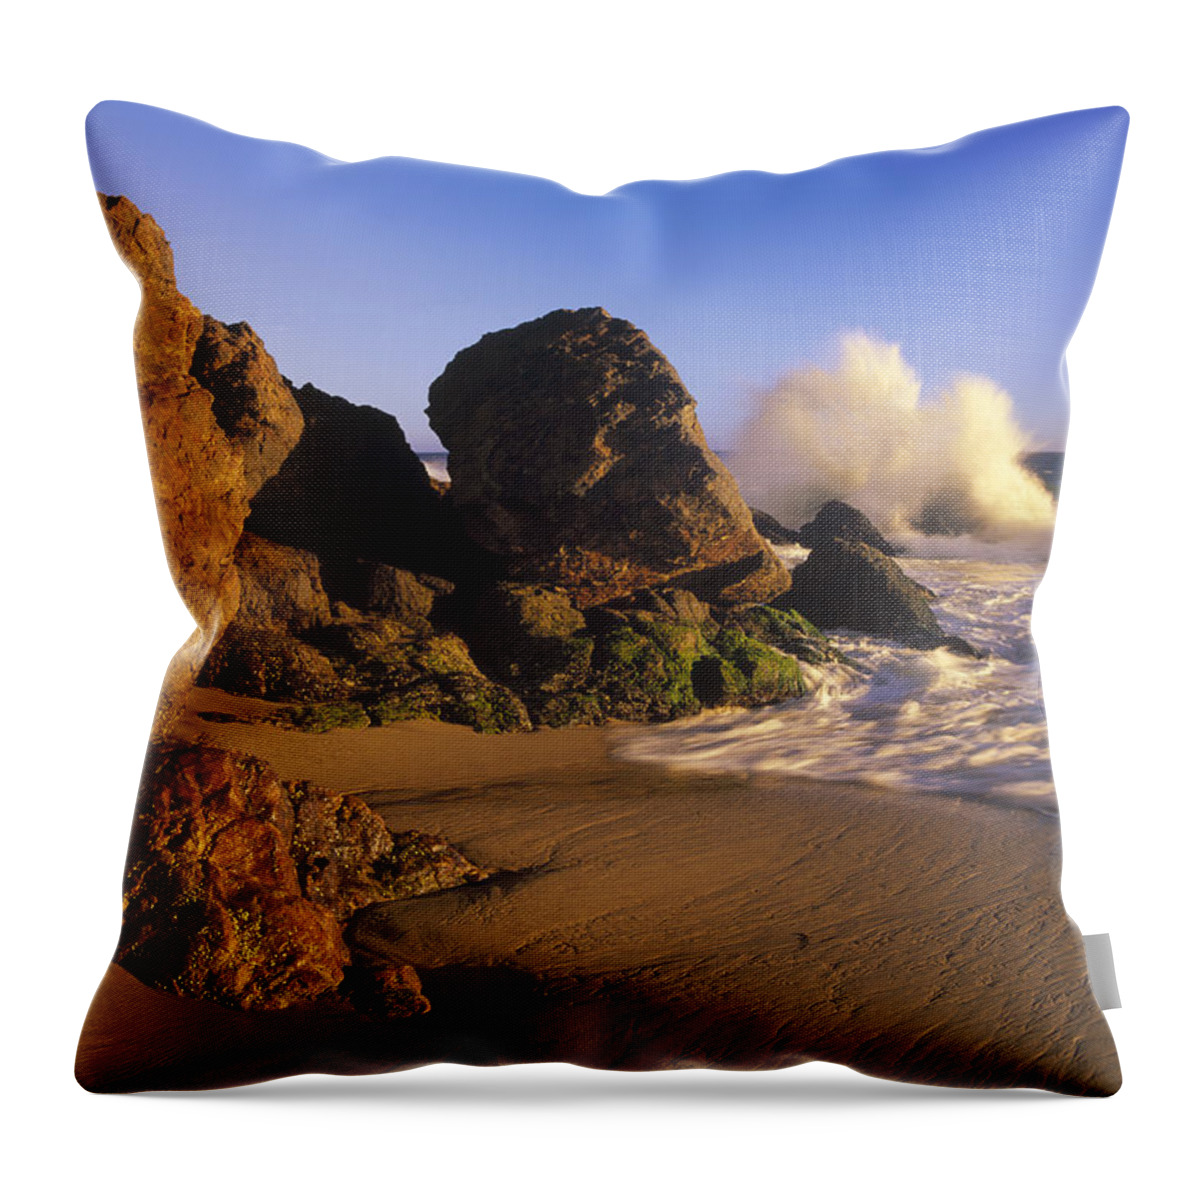 00170064 Throw Pillow featuring the photograph Waves Crashing On Point Dume Beach #1 by Tim Fitzharris